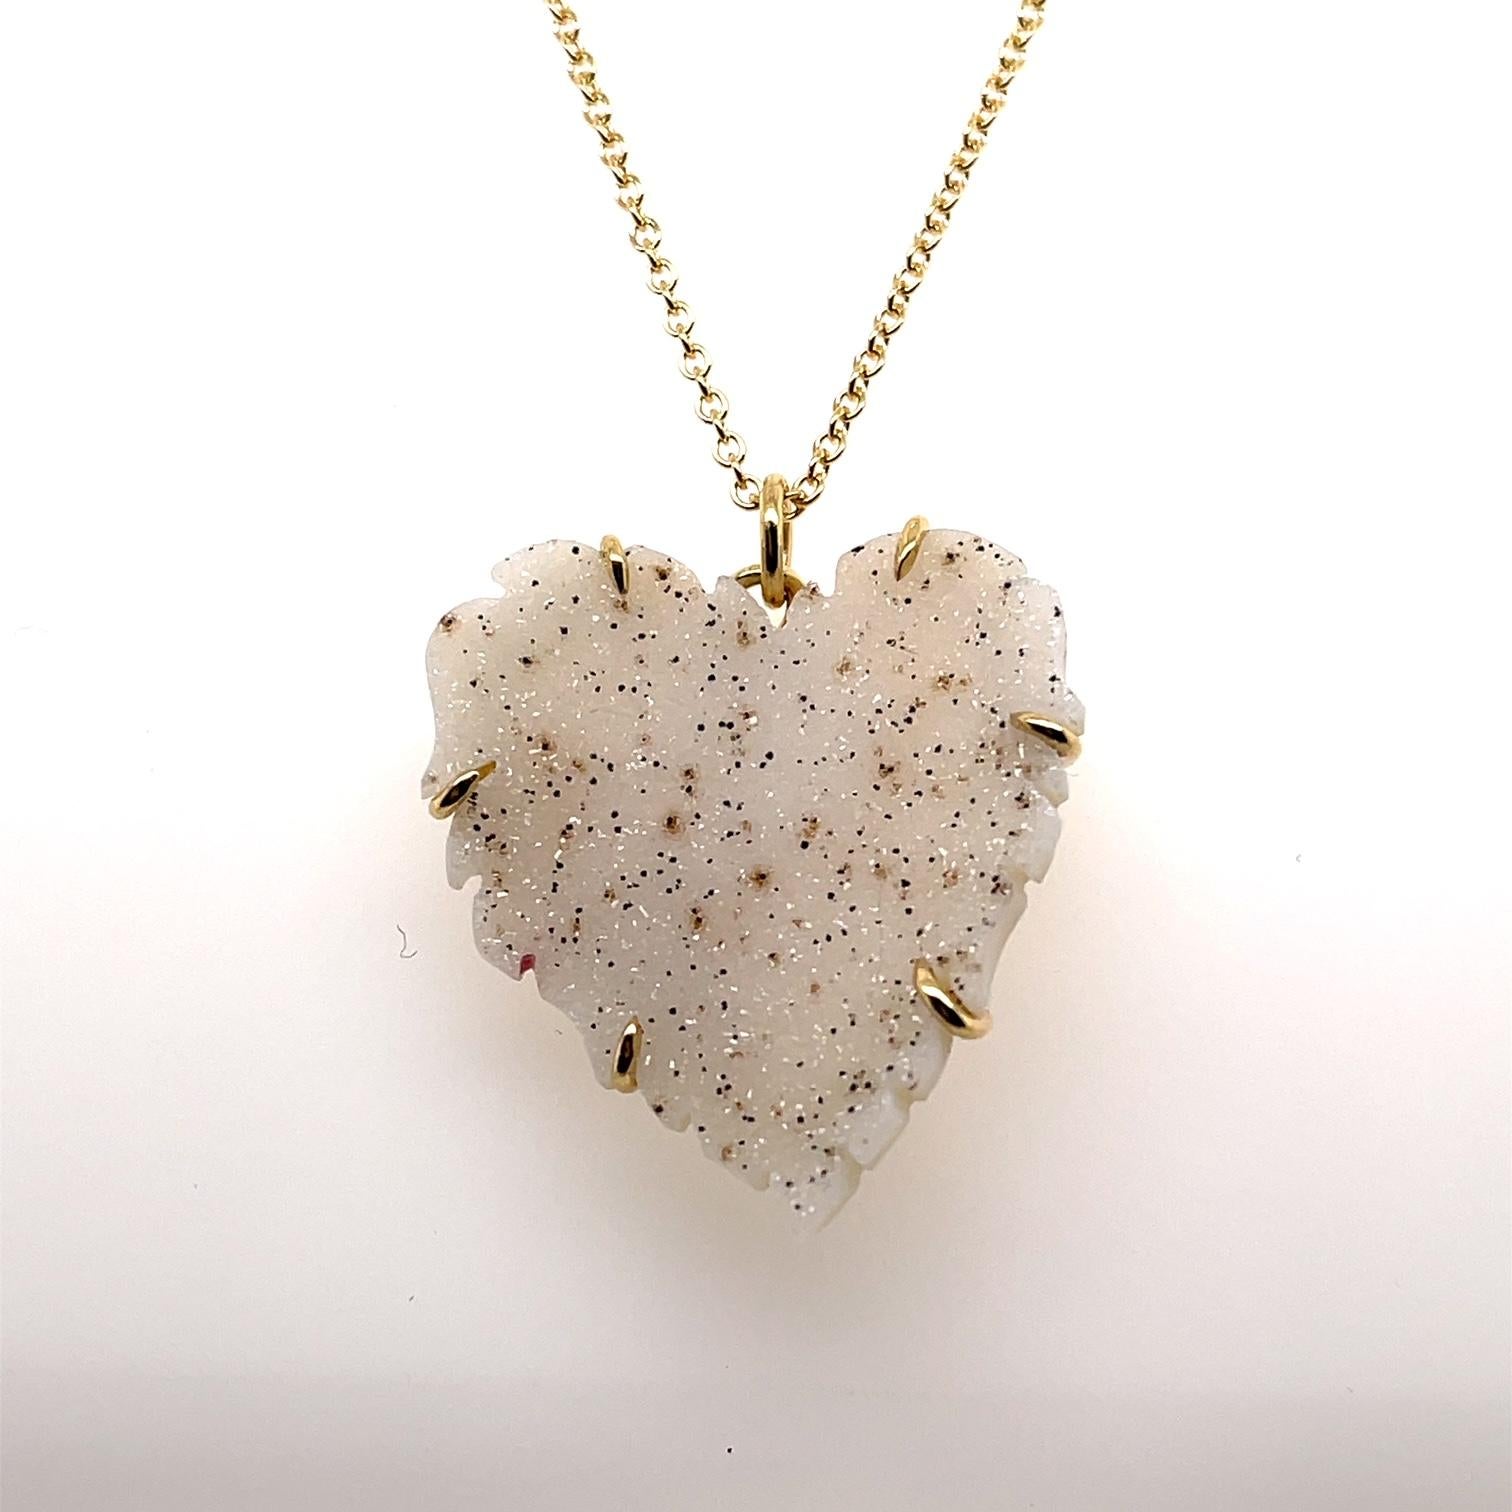 Uncut 18k Yellow Gold White Speckled Carved Druzy Heart Pendant For Sale